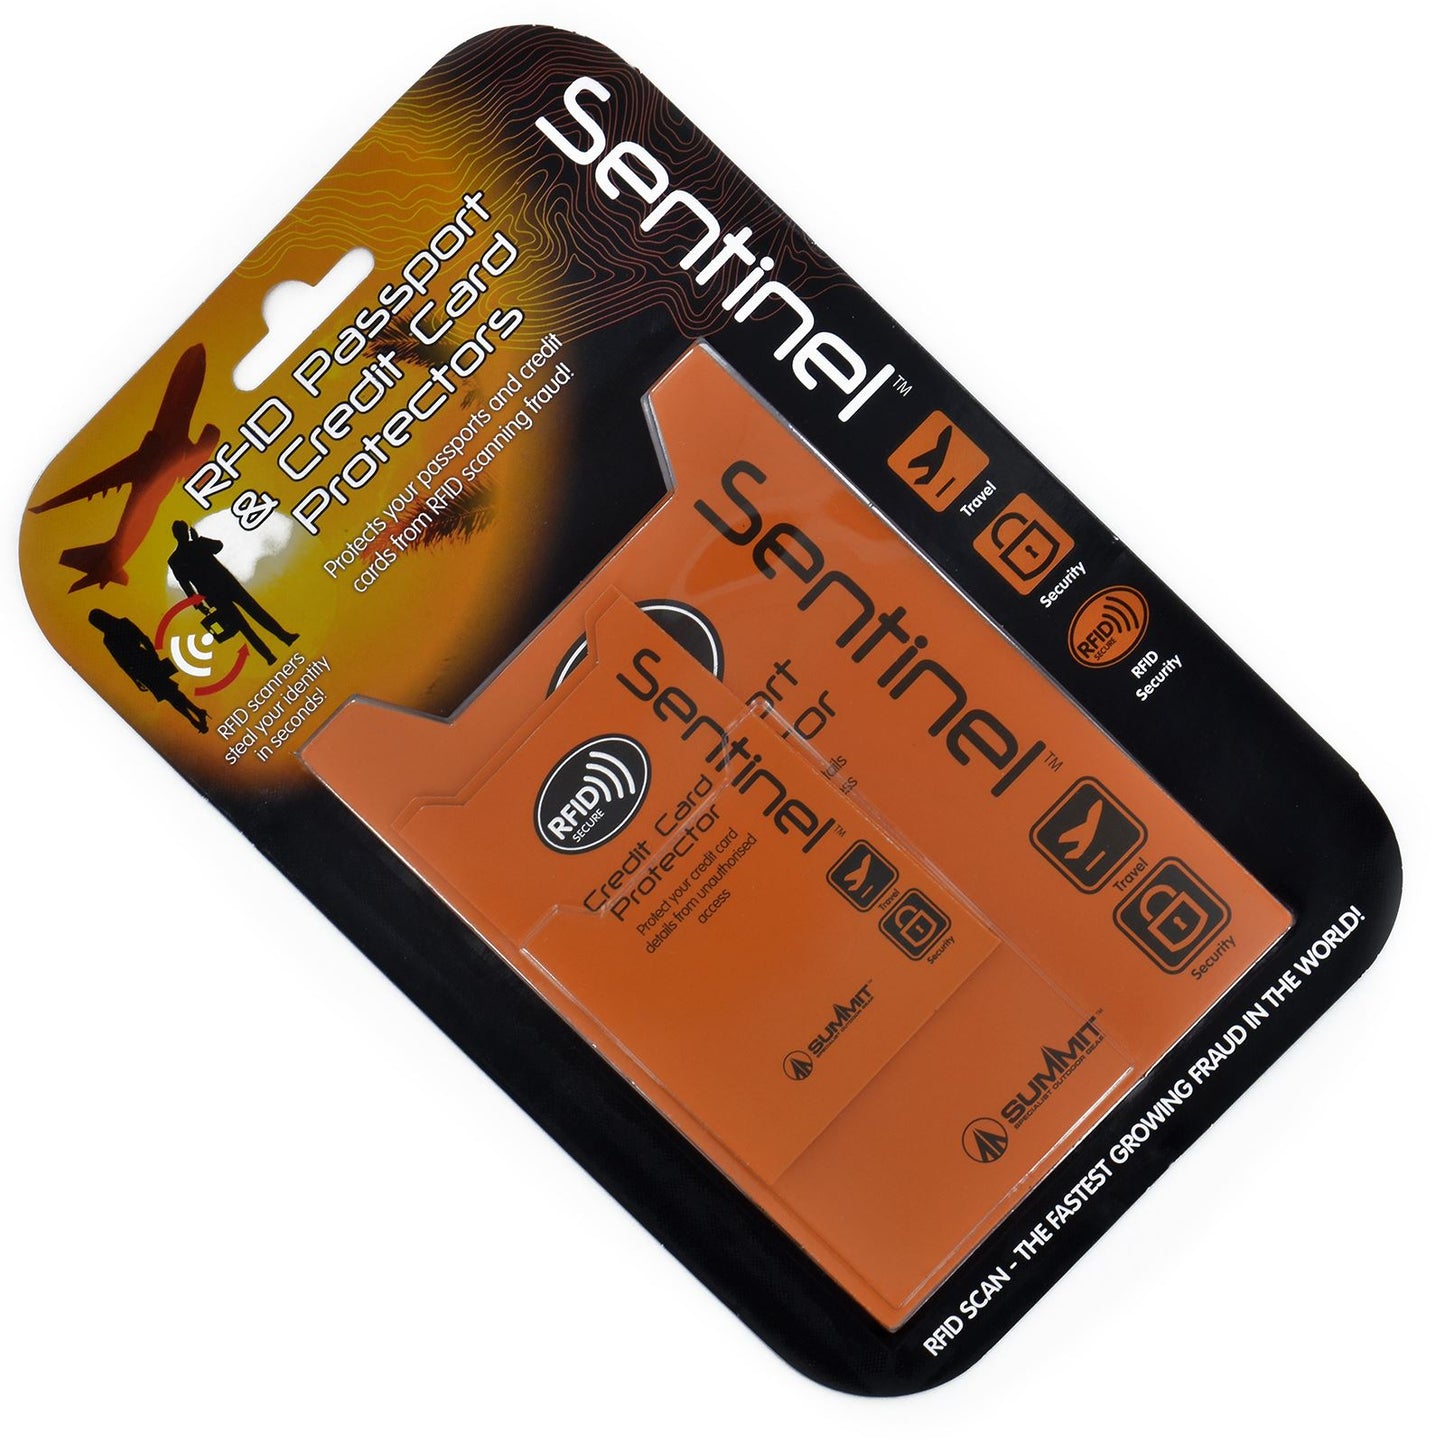 Protector For Contactless Credit Cards To Prevent Unauthorized Scanning